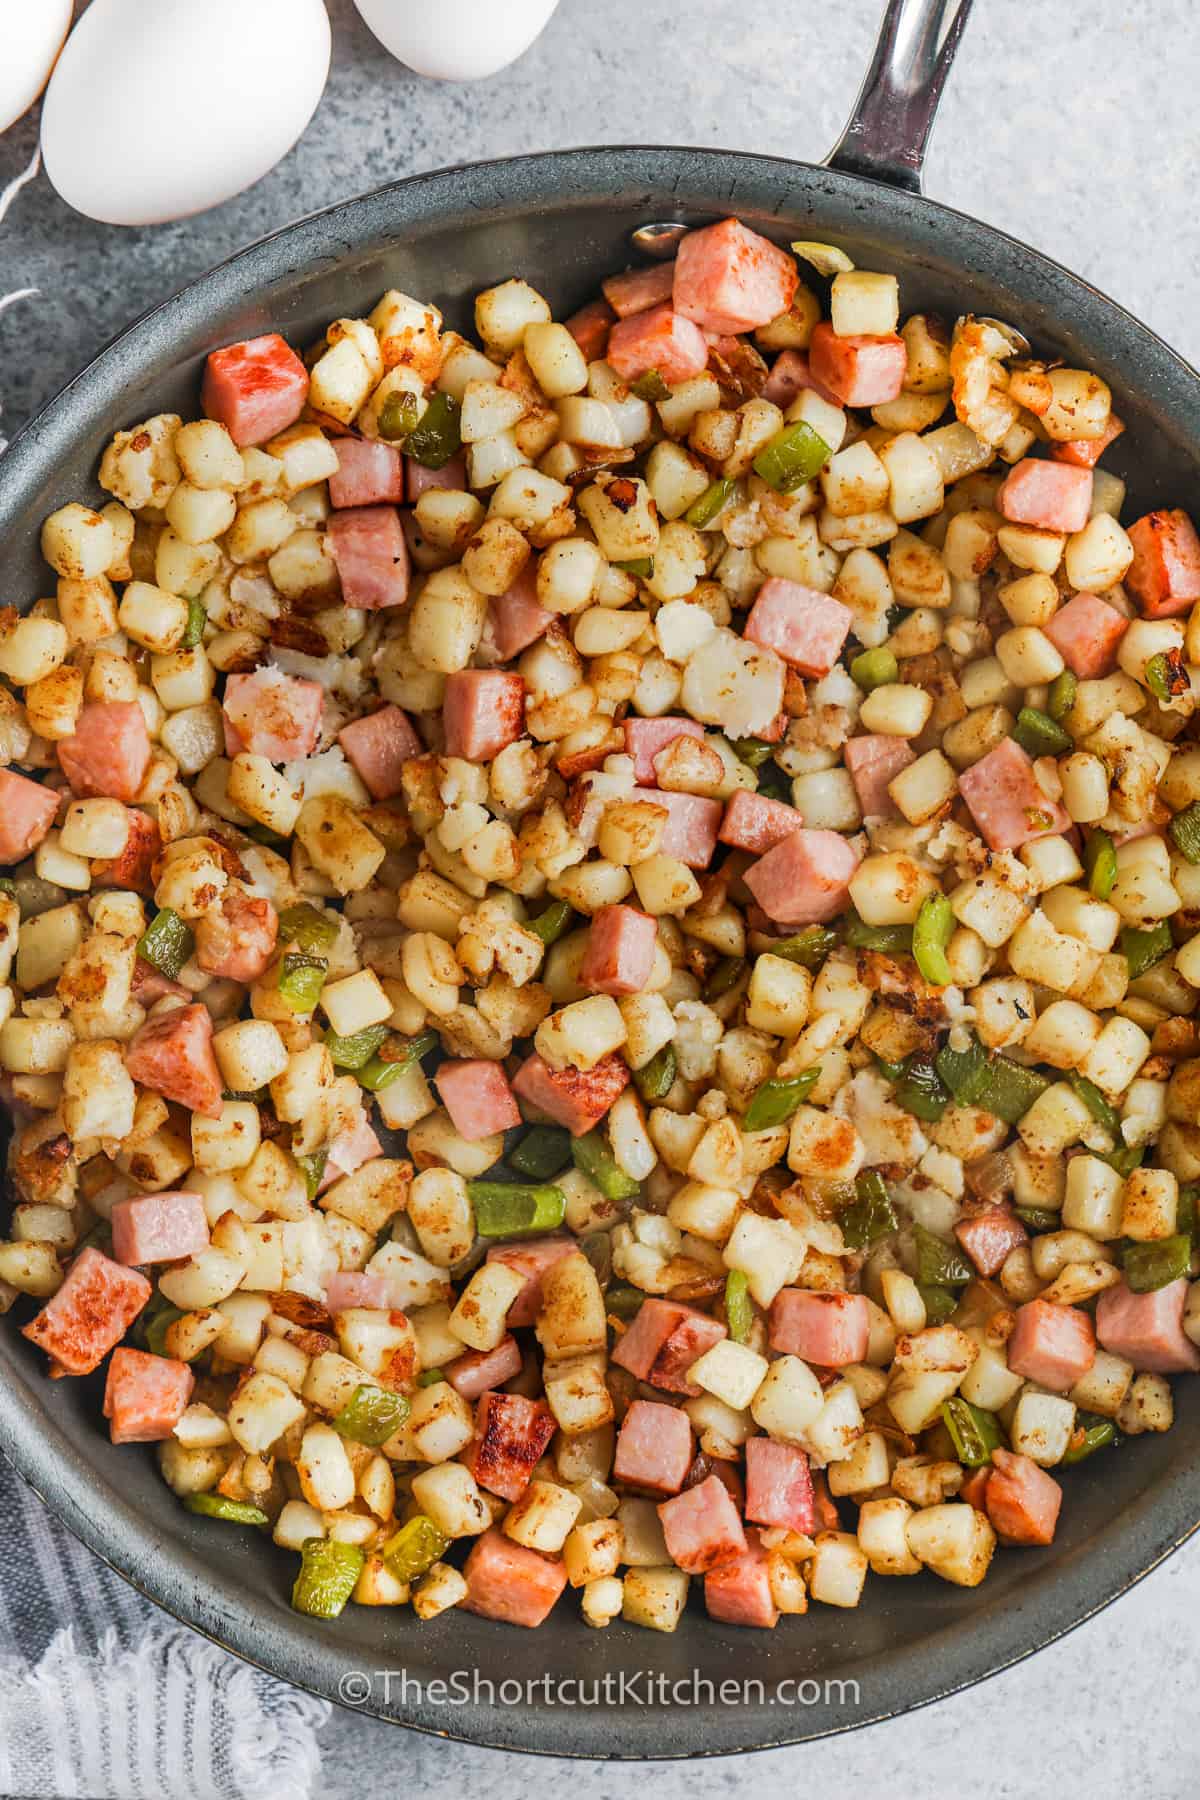 Breakfast Hash With Ham ingredients in the pan cooking